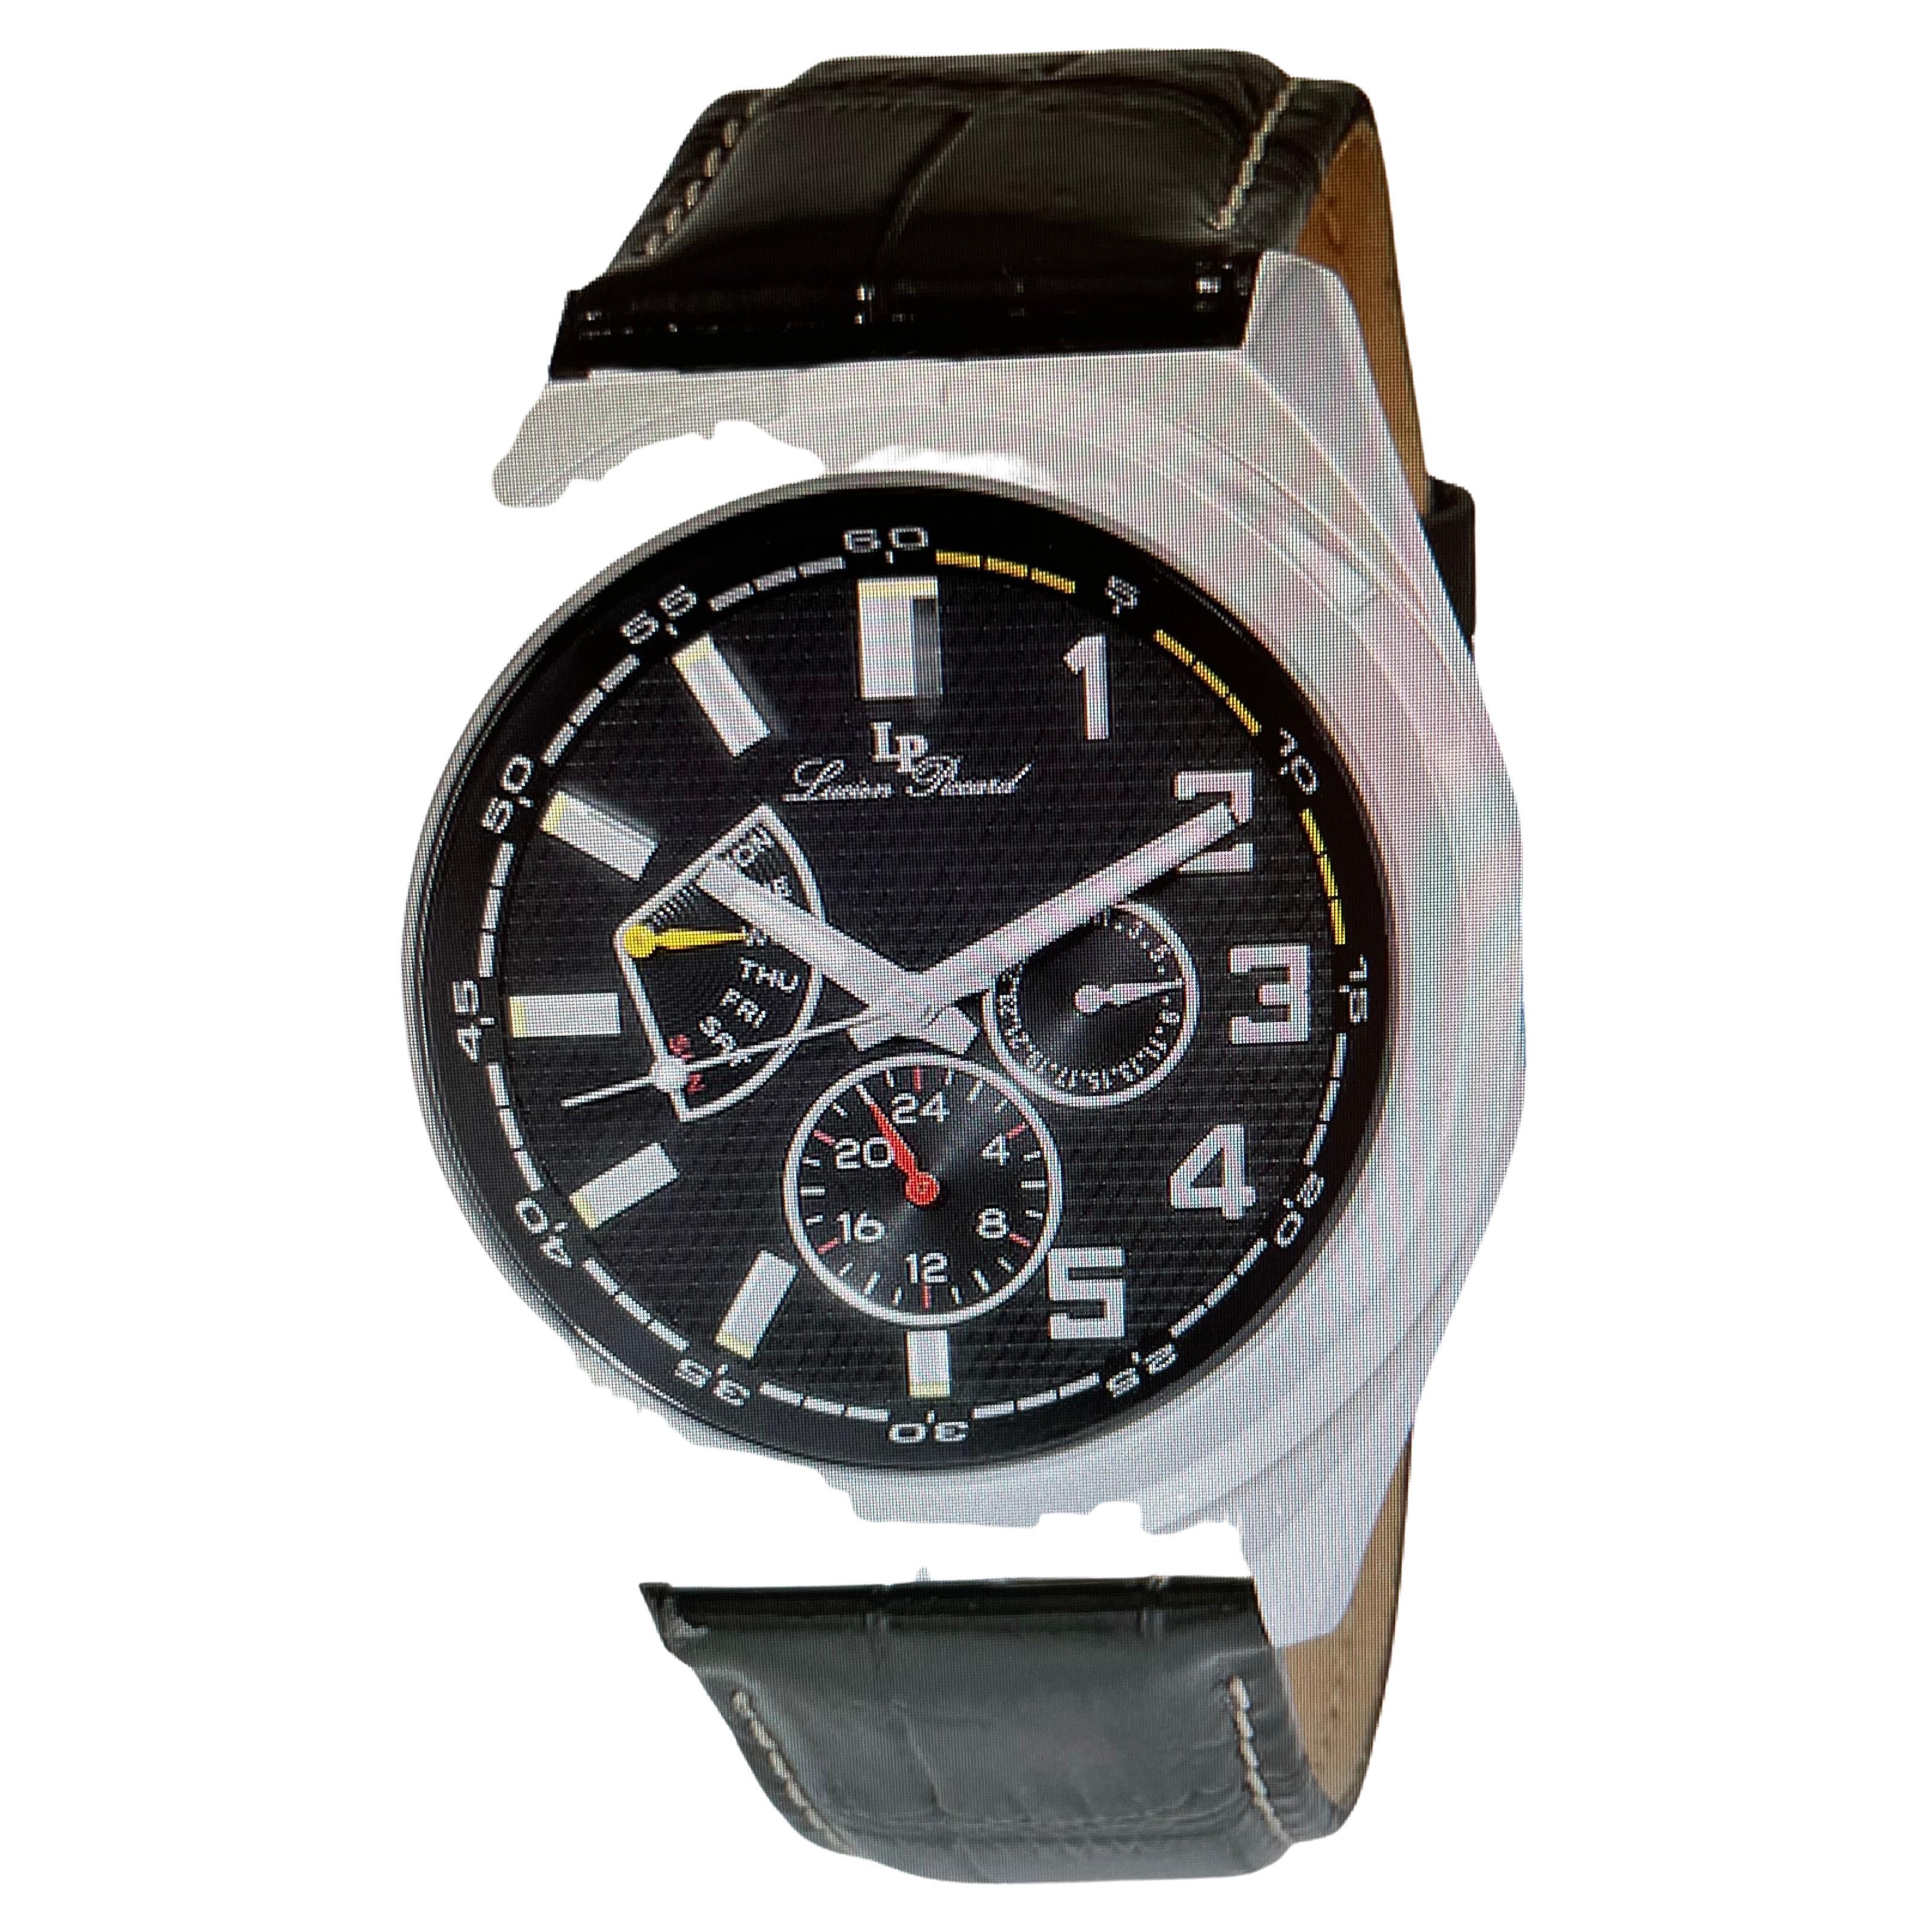 Pre owned
Authentic LUCIEN PICCARD Heritage Black Dial Men's Multifunction Watch 28104BK
Description
Silver-tone stainless steel case with a black leather strap. Fixed silver-tone stainless steel bezel. Black dial with silver-tone hands and